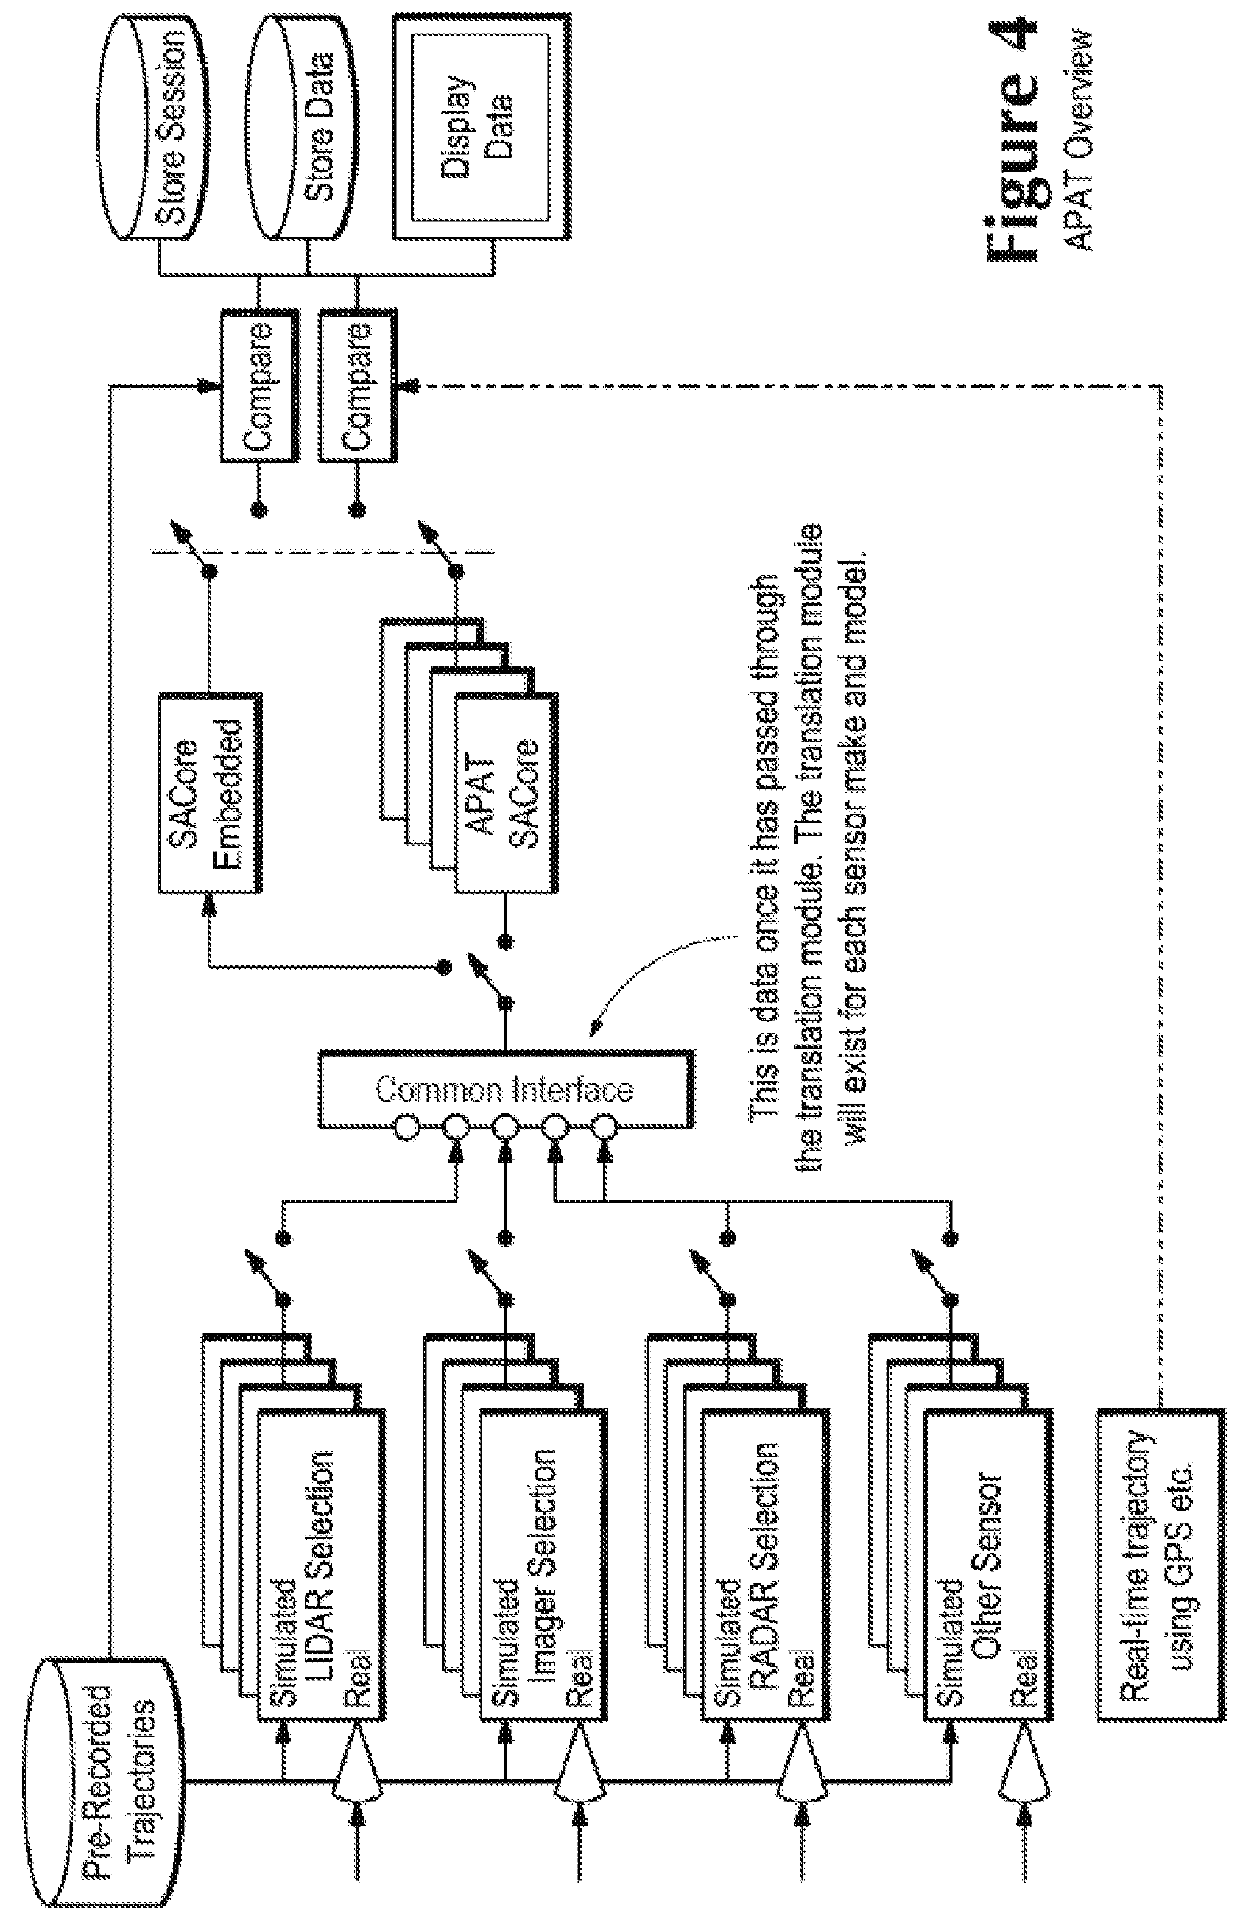 System and method for modeling advanced automotive safety systems